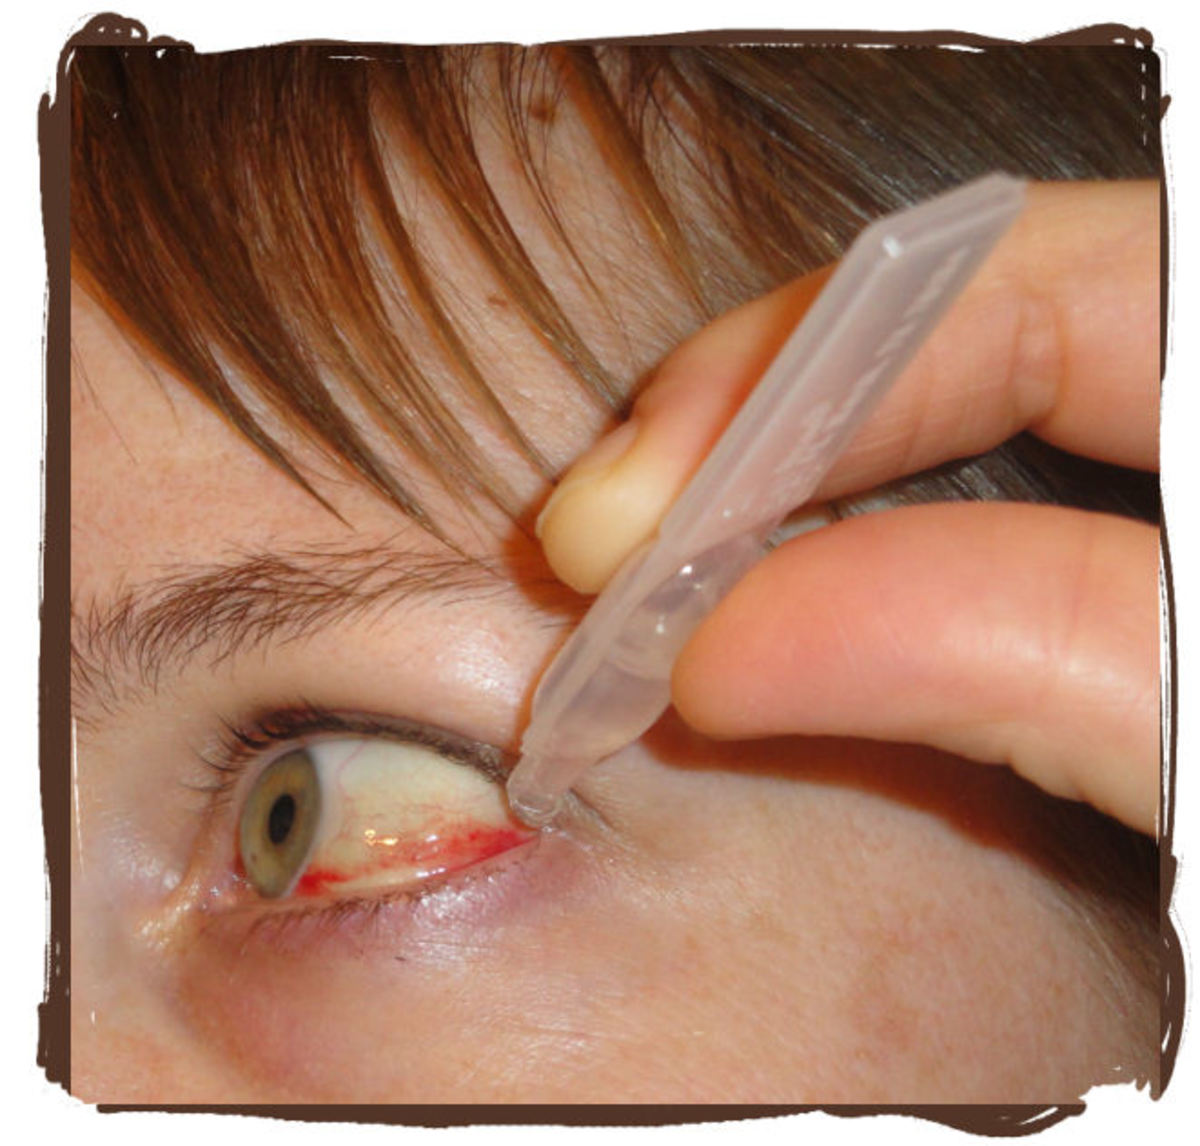 Since the broken blood vessel caused my eye to feel dry, and a little scratchy, the eye drops helped a little.